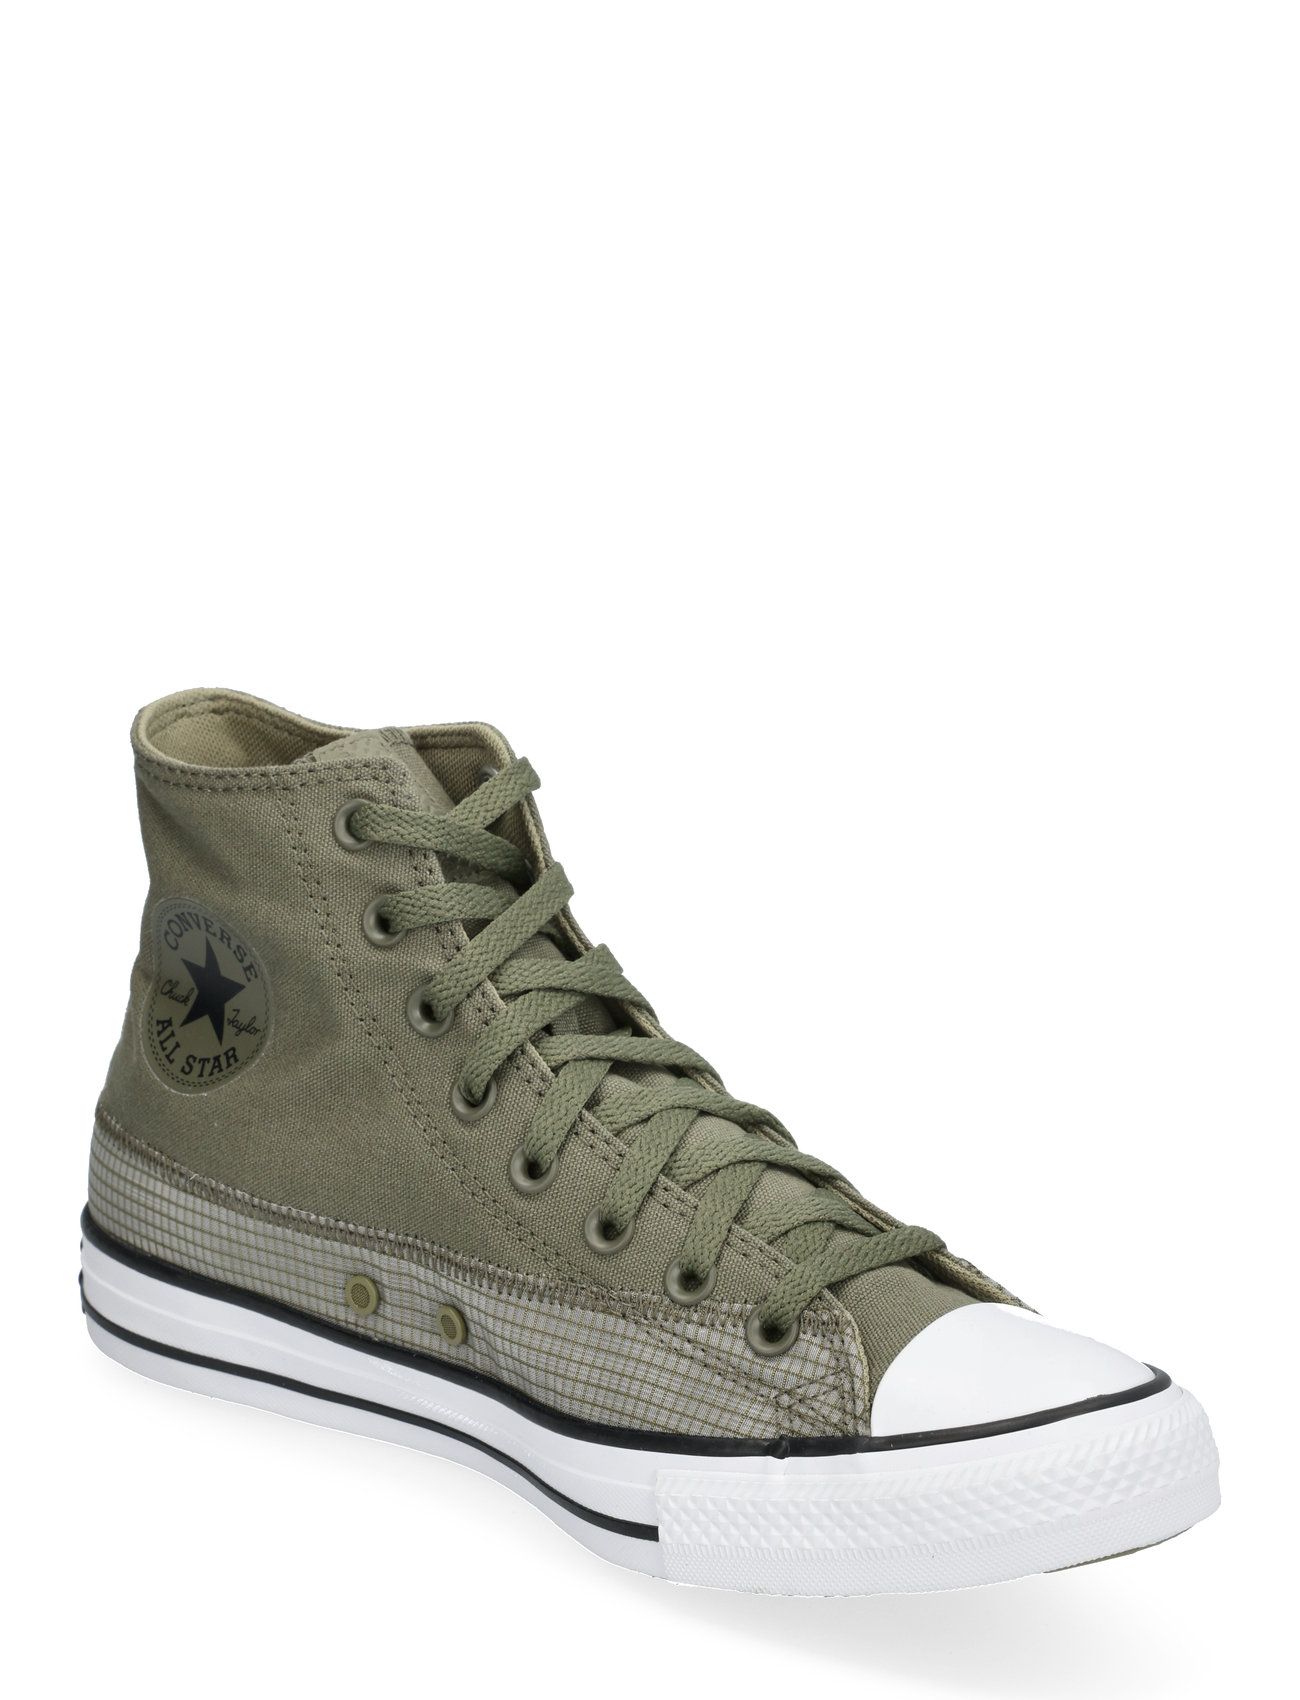 Chuck Taylor All Star Sport Sneakers High-top Sneakers Khaki Green Converse